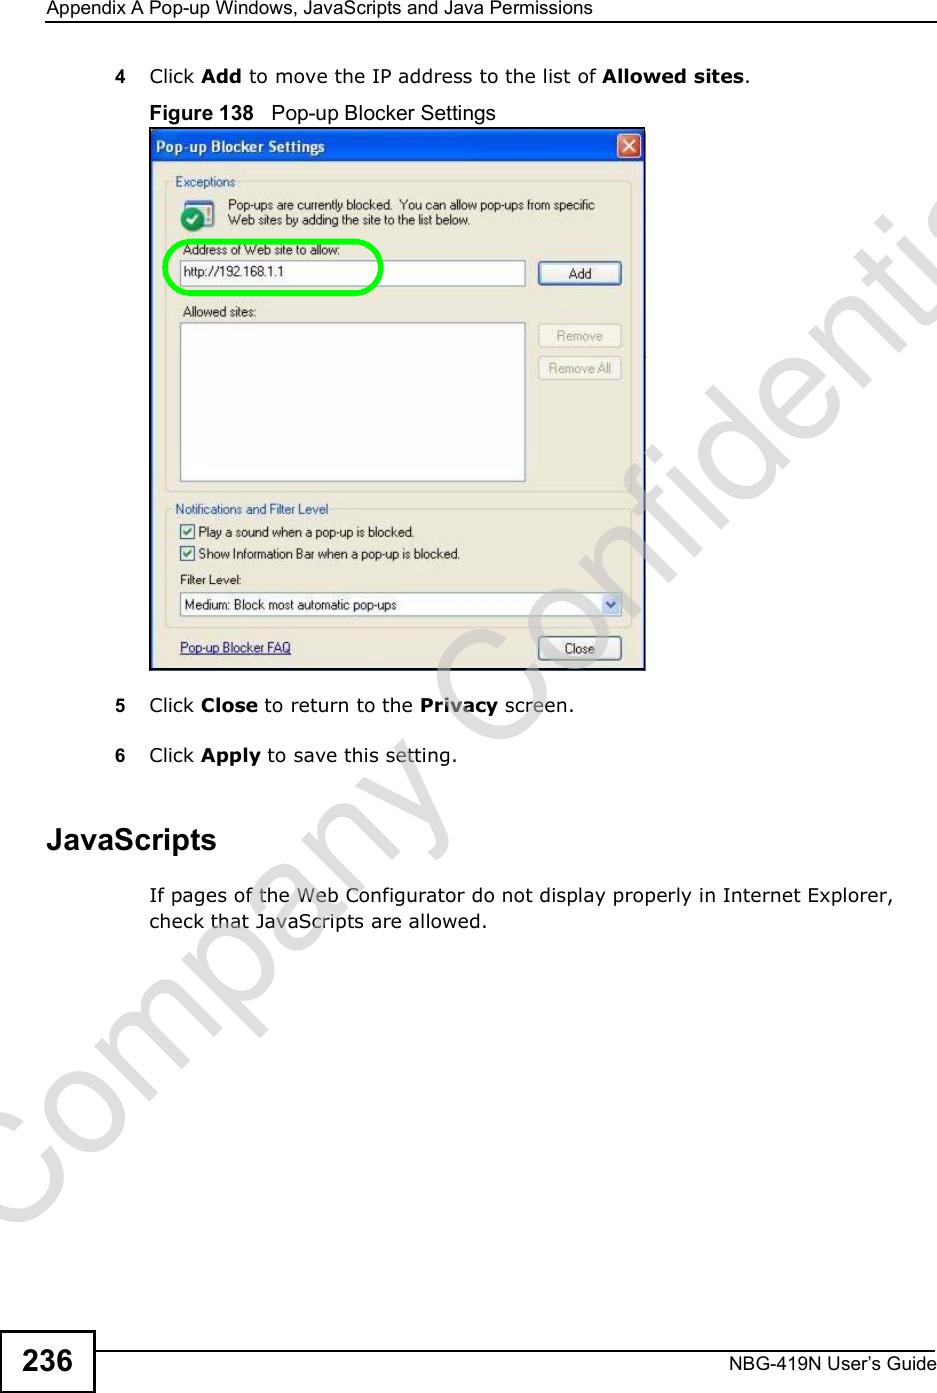 Appendix APop-up Windows, JavaScripts and Java PermissionsNBG-419N User s Guide2364Click Add to move the IP address to the list of Allowed sites.Figure 138   Pop-up Blocker Settings5Click Close to return to the Privacy screen. 6Click Apply to save this setting. JavaScriptsIf pages of the Web Configurator do not display properly in Internet Explorer, check that JavaScripts are allowed. Company Confidential